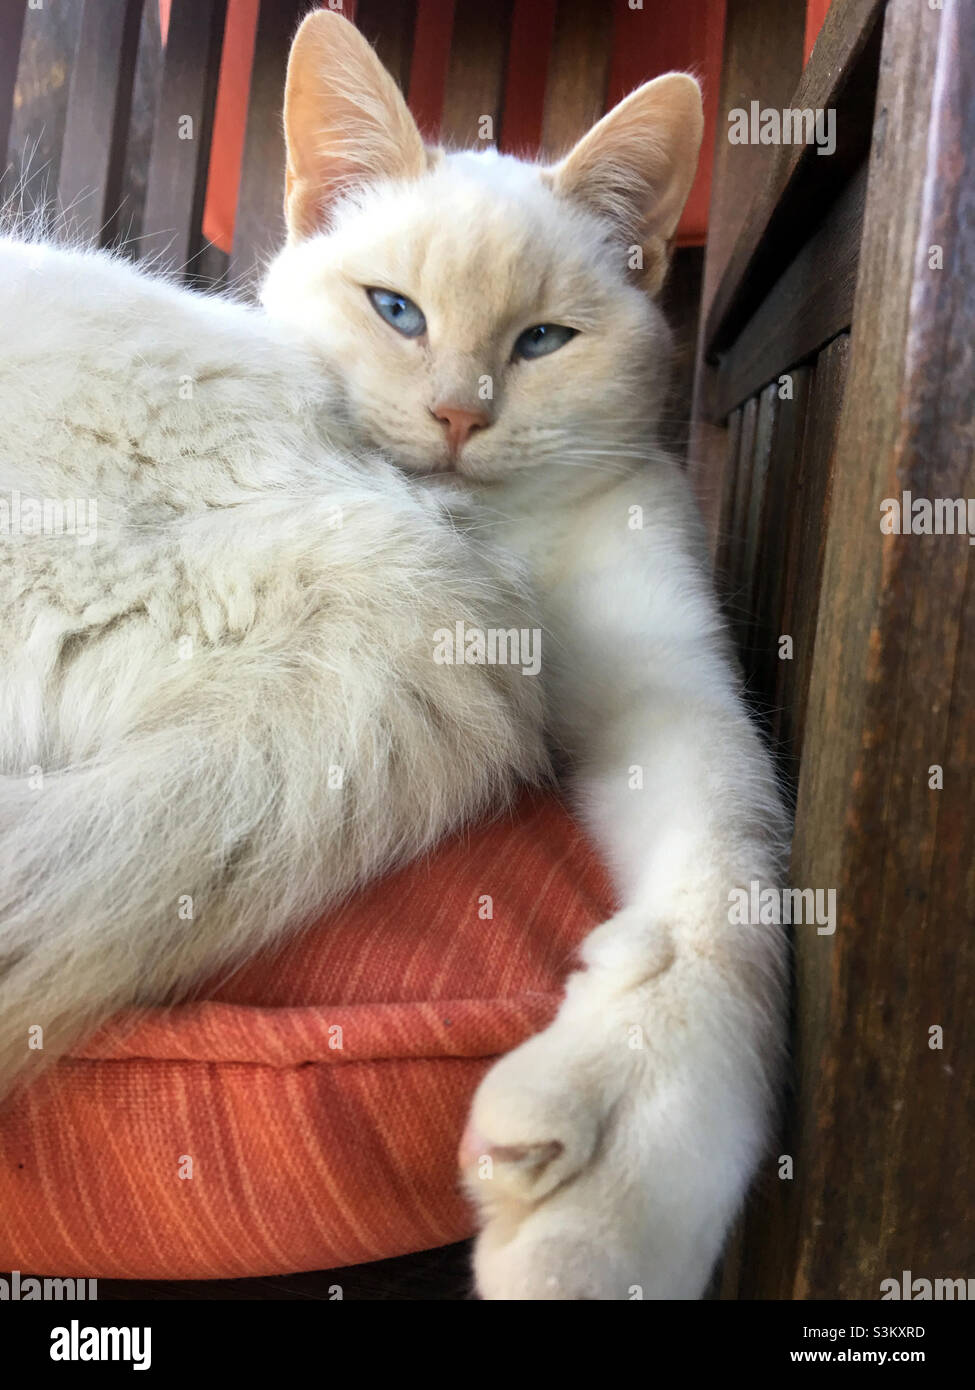 White cat with beautiful blue eyes laying on its back relaxing on a wooden chair with a cushion looking at viewer.  Makes you smile. Stock Photo